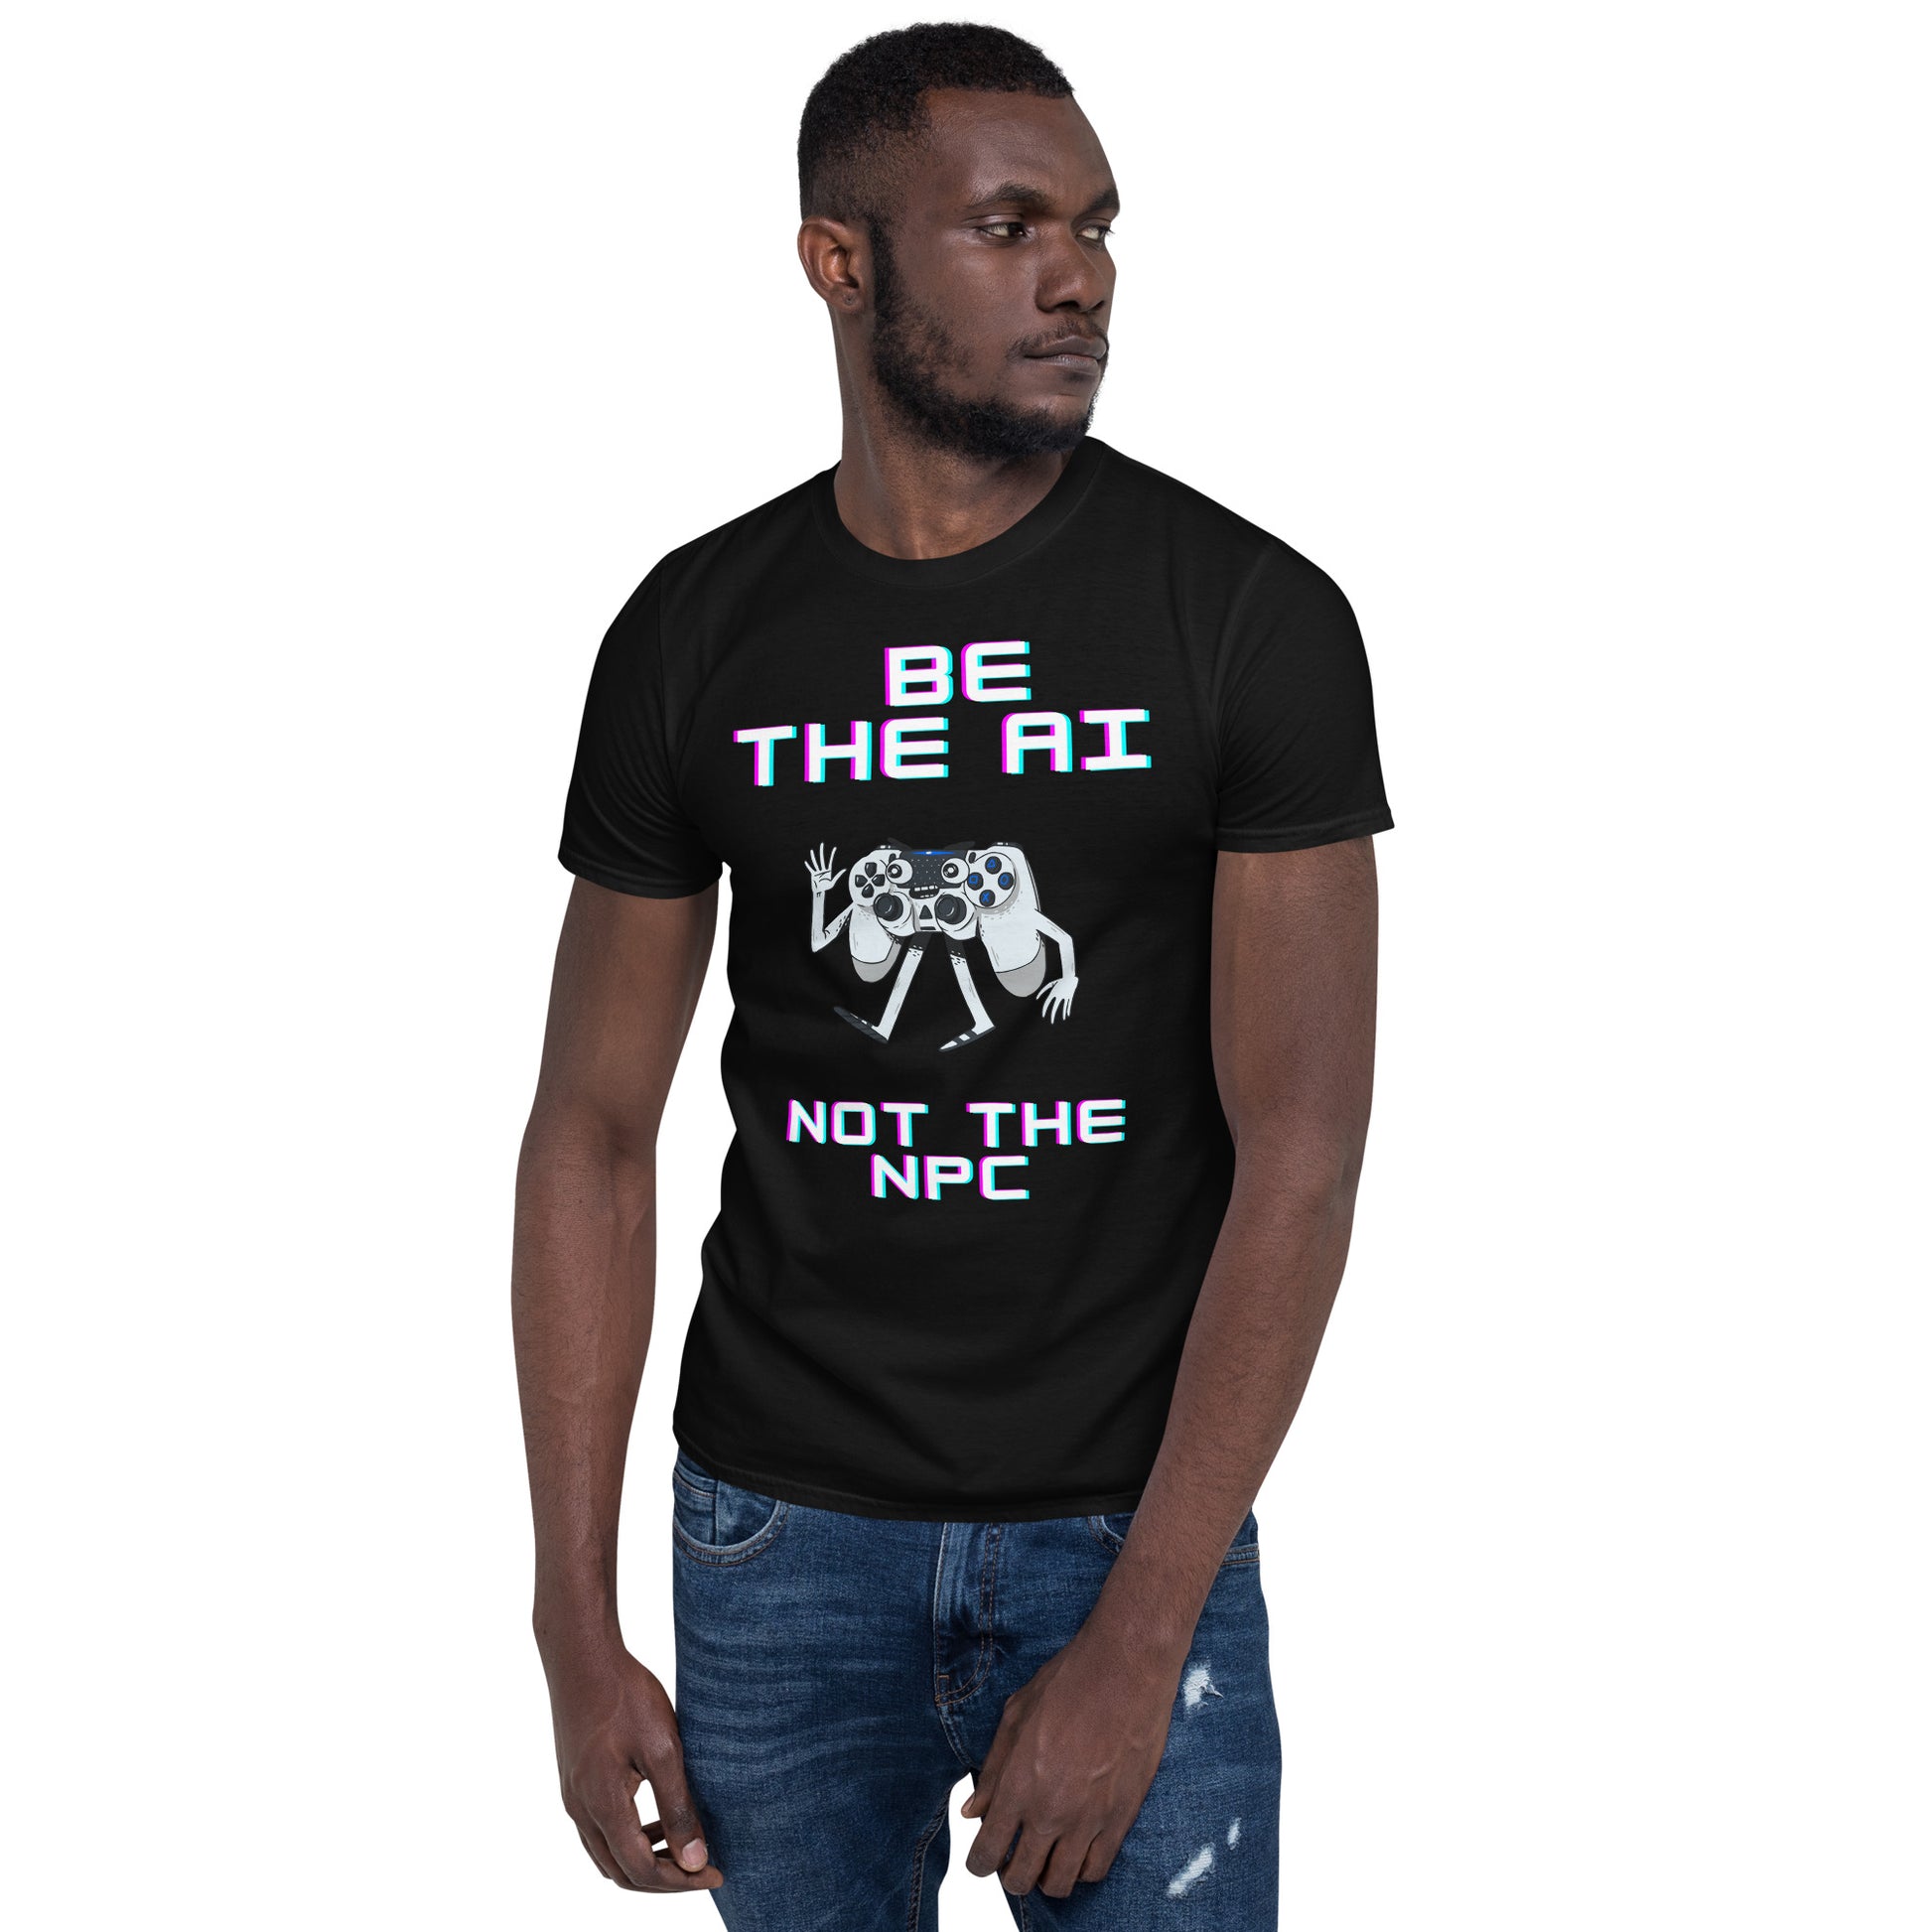 Man in black short-sleeve t-shirt that says be the AI not the NPC